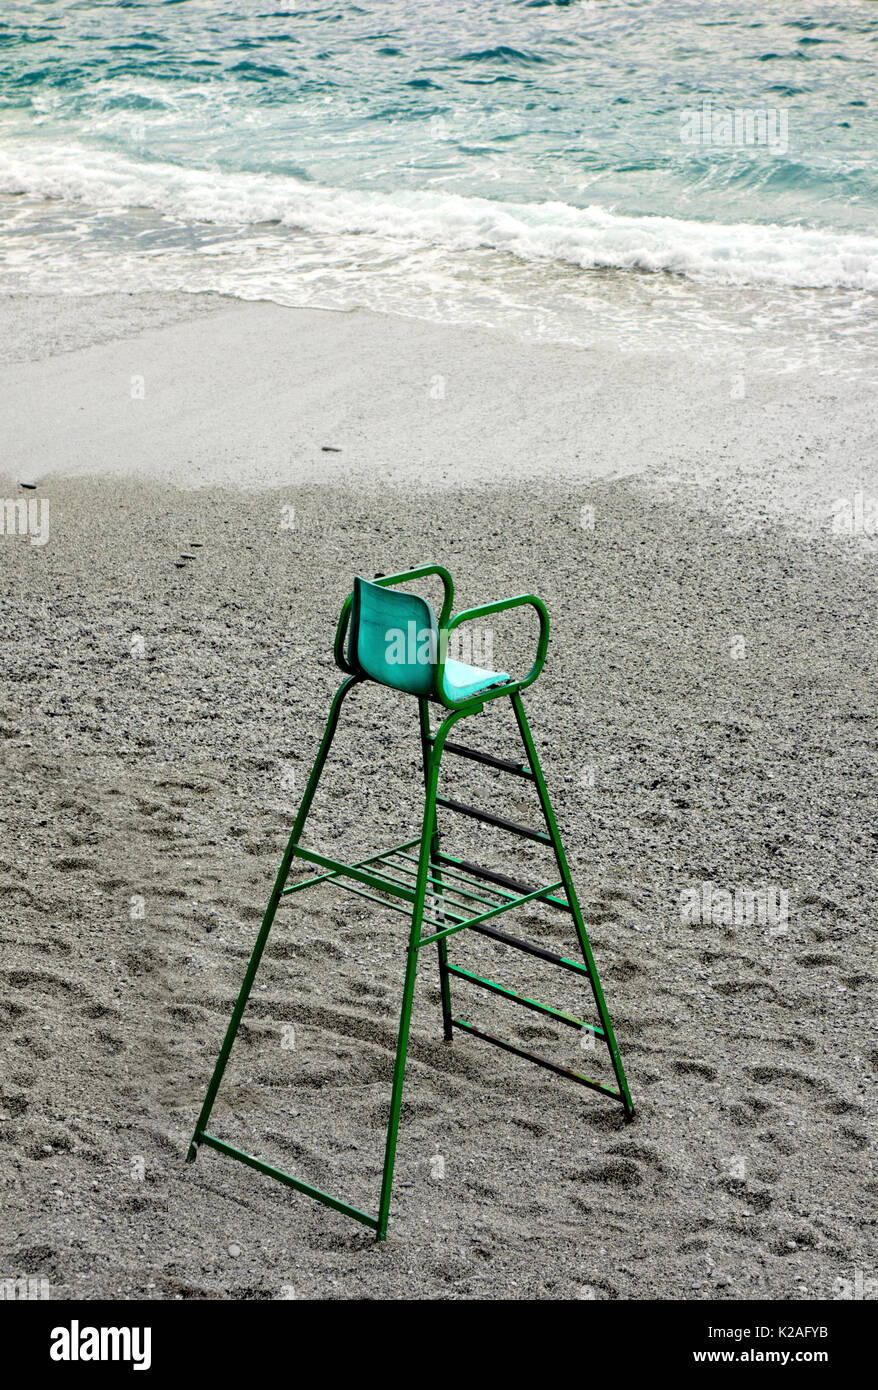 Lifeguard chair on the beach at Monterosso al Mare, Italy, 2017. Stock Photo